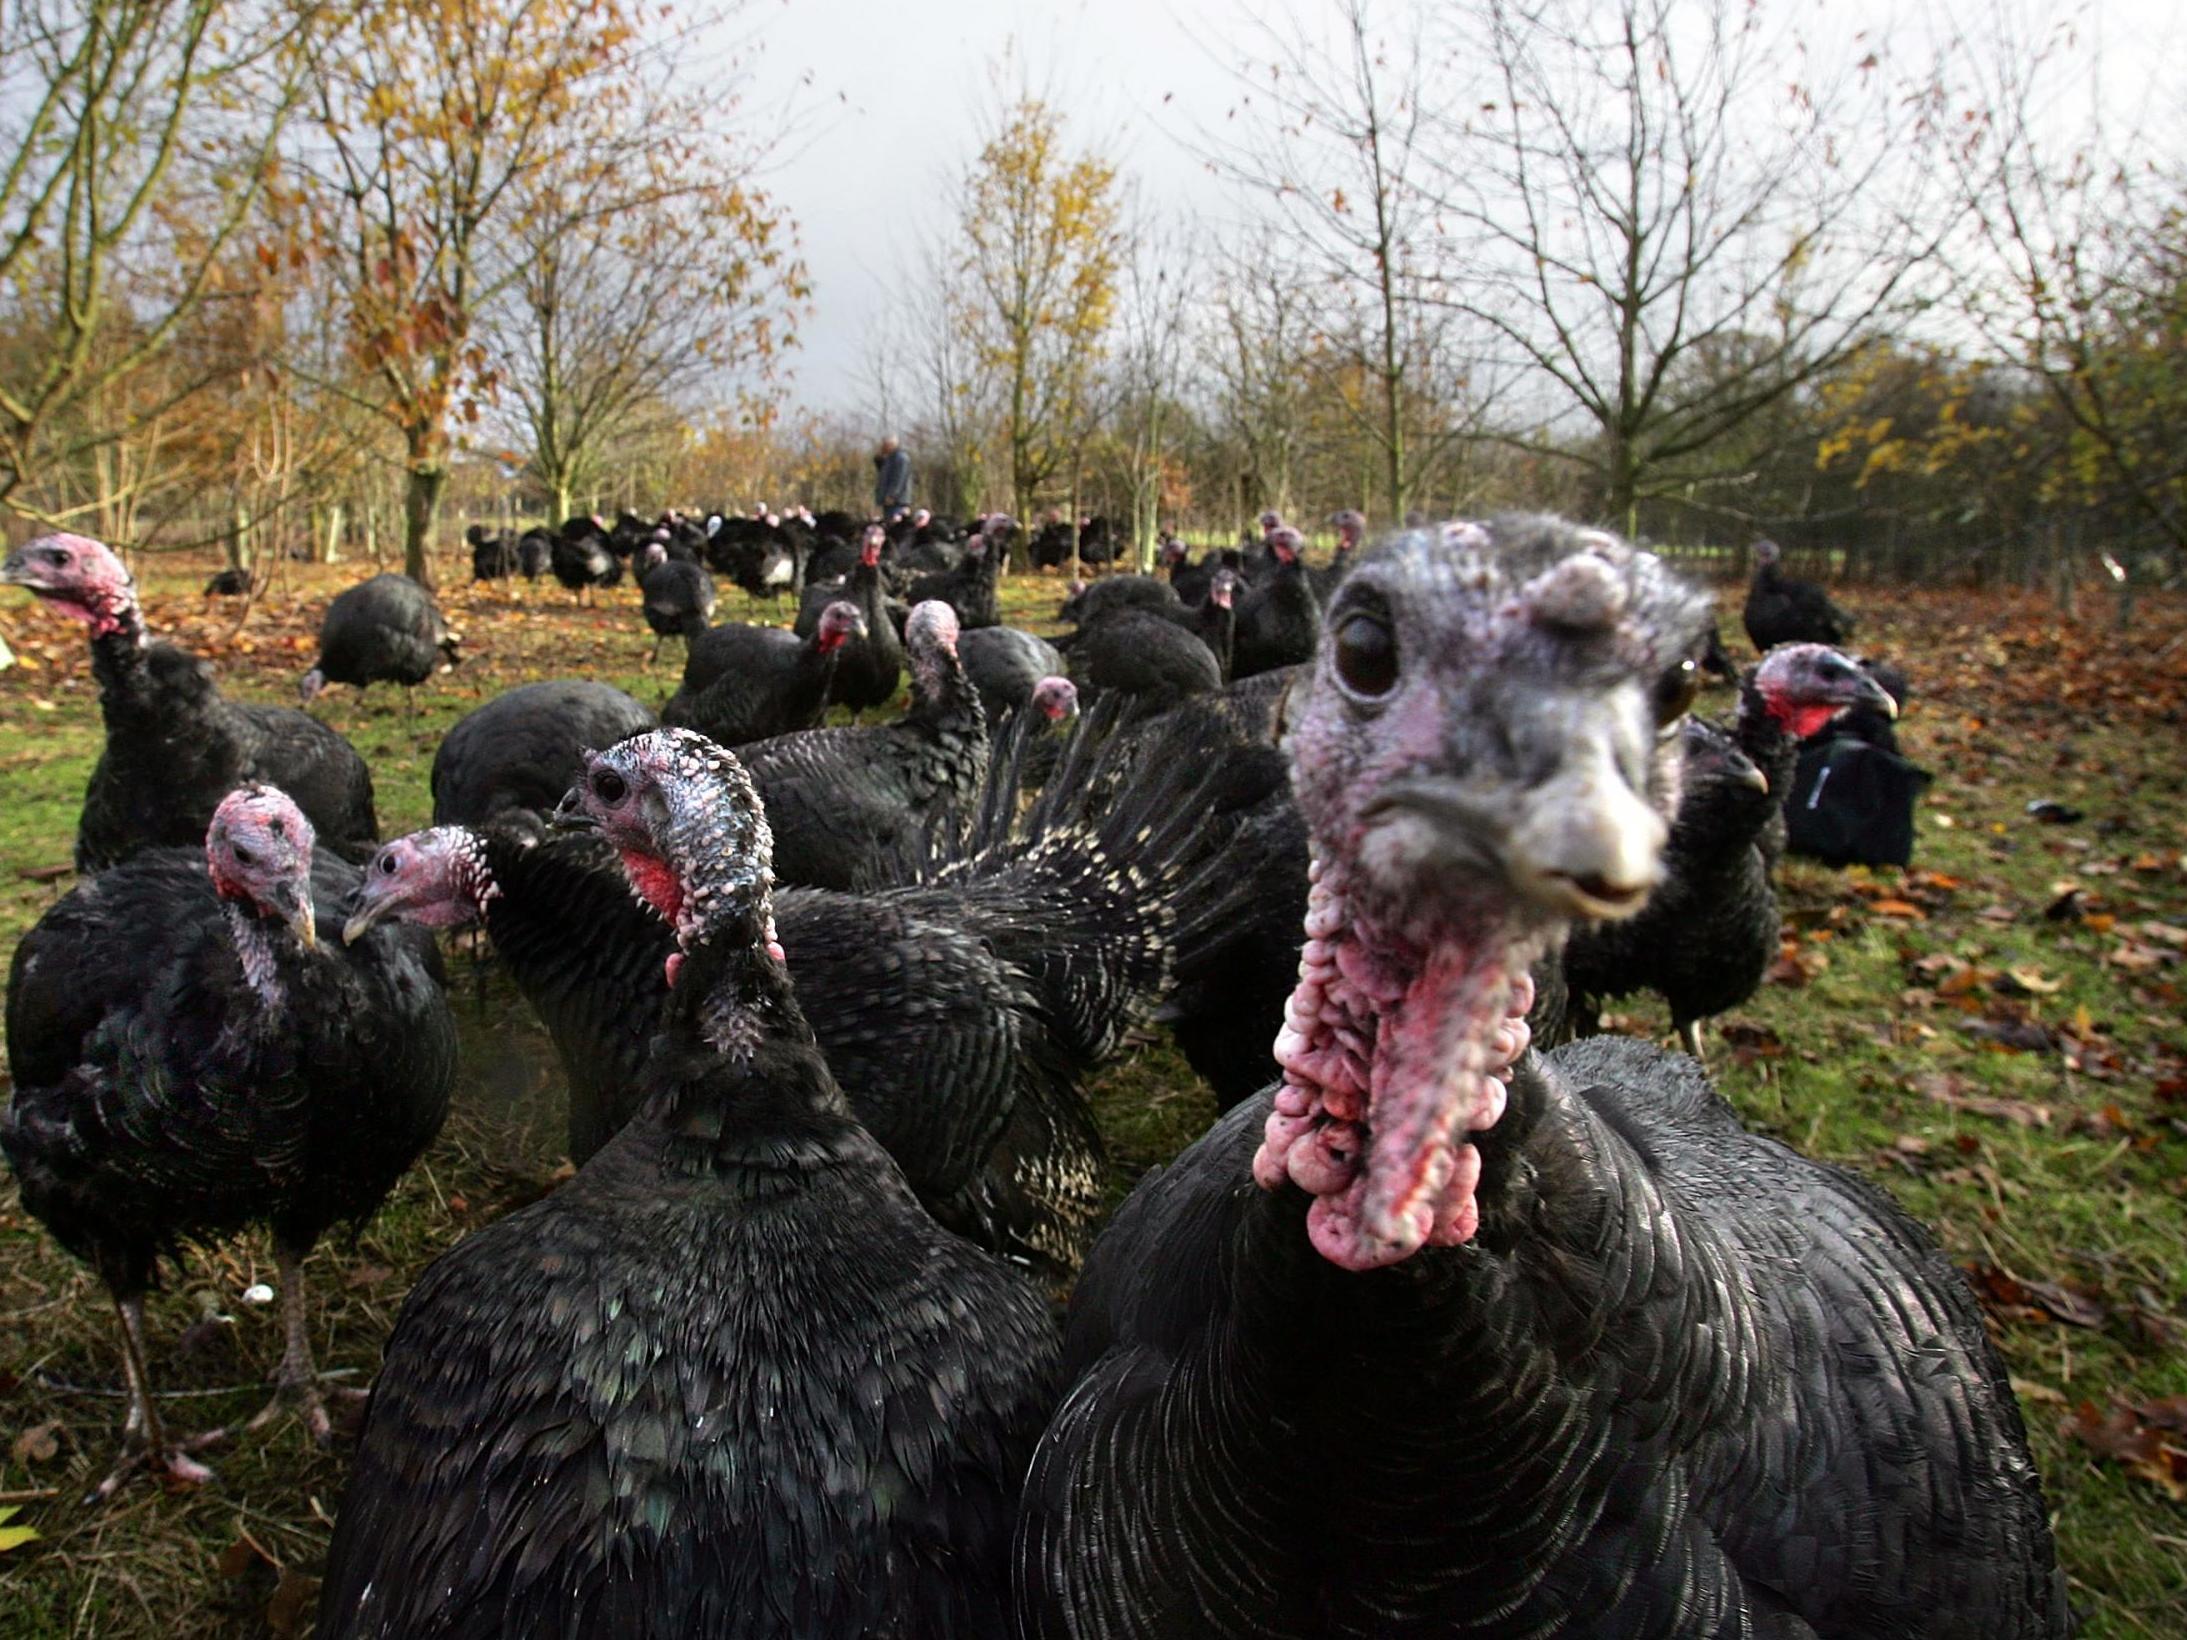 Walkers were stunned to stumble across the 50-strong group of birds